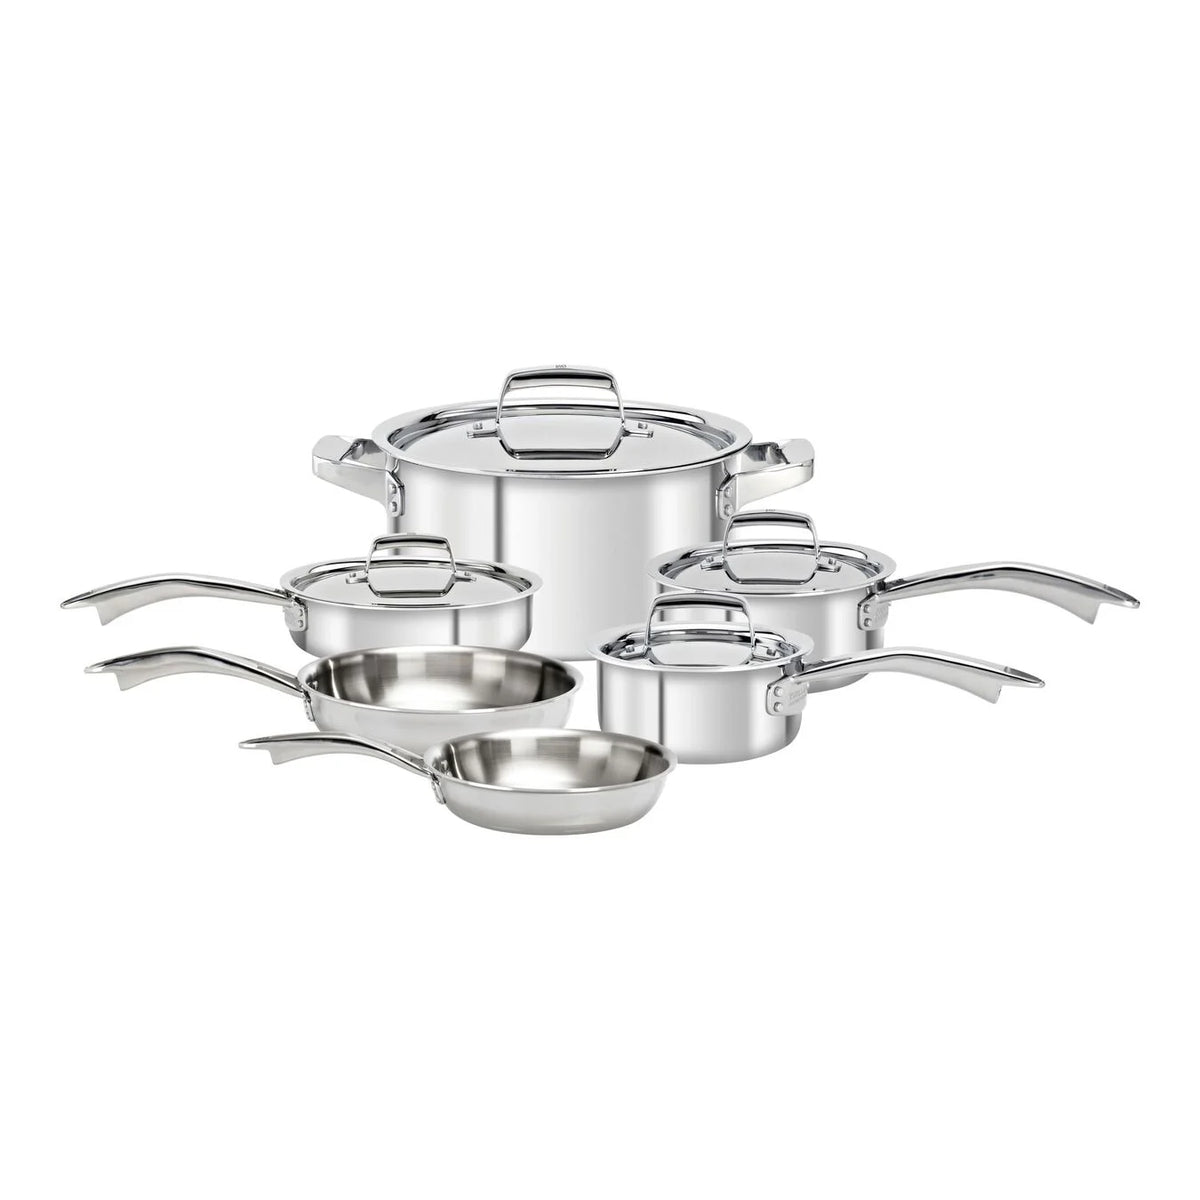 ZWILLING TruClad 10 Piece 18/10 Stainless Steel Cookware set